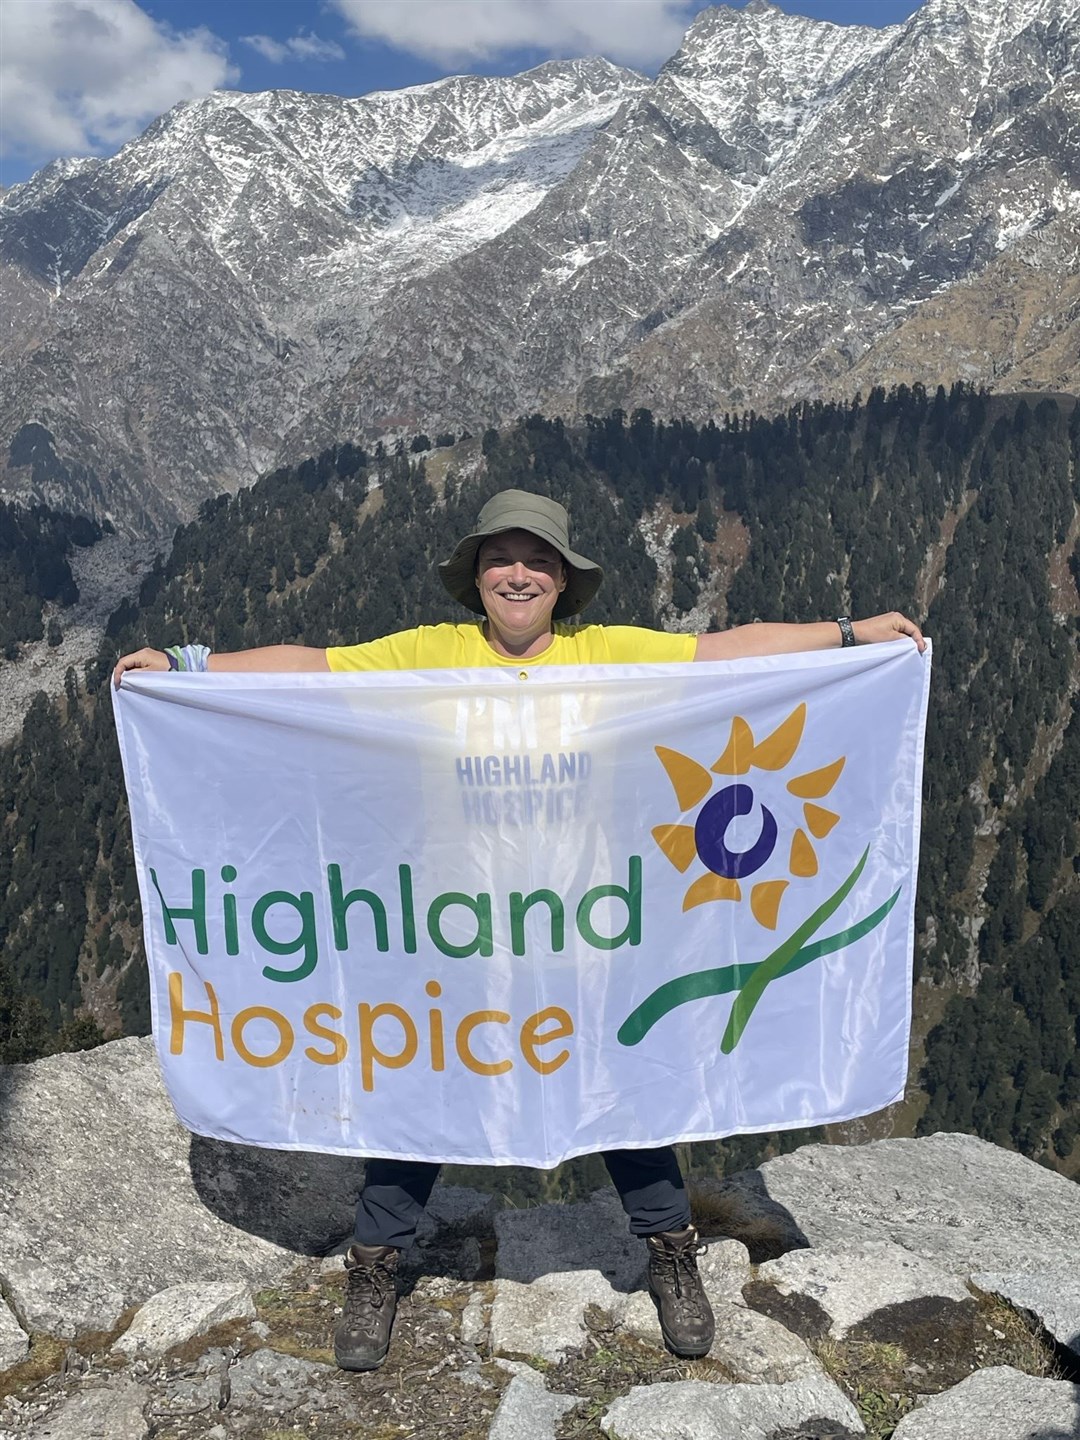 Flying the hospice flag.